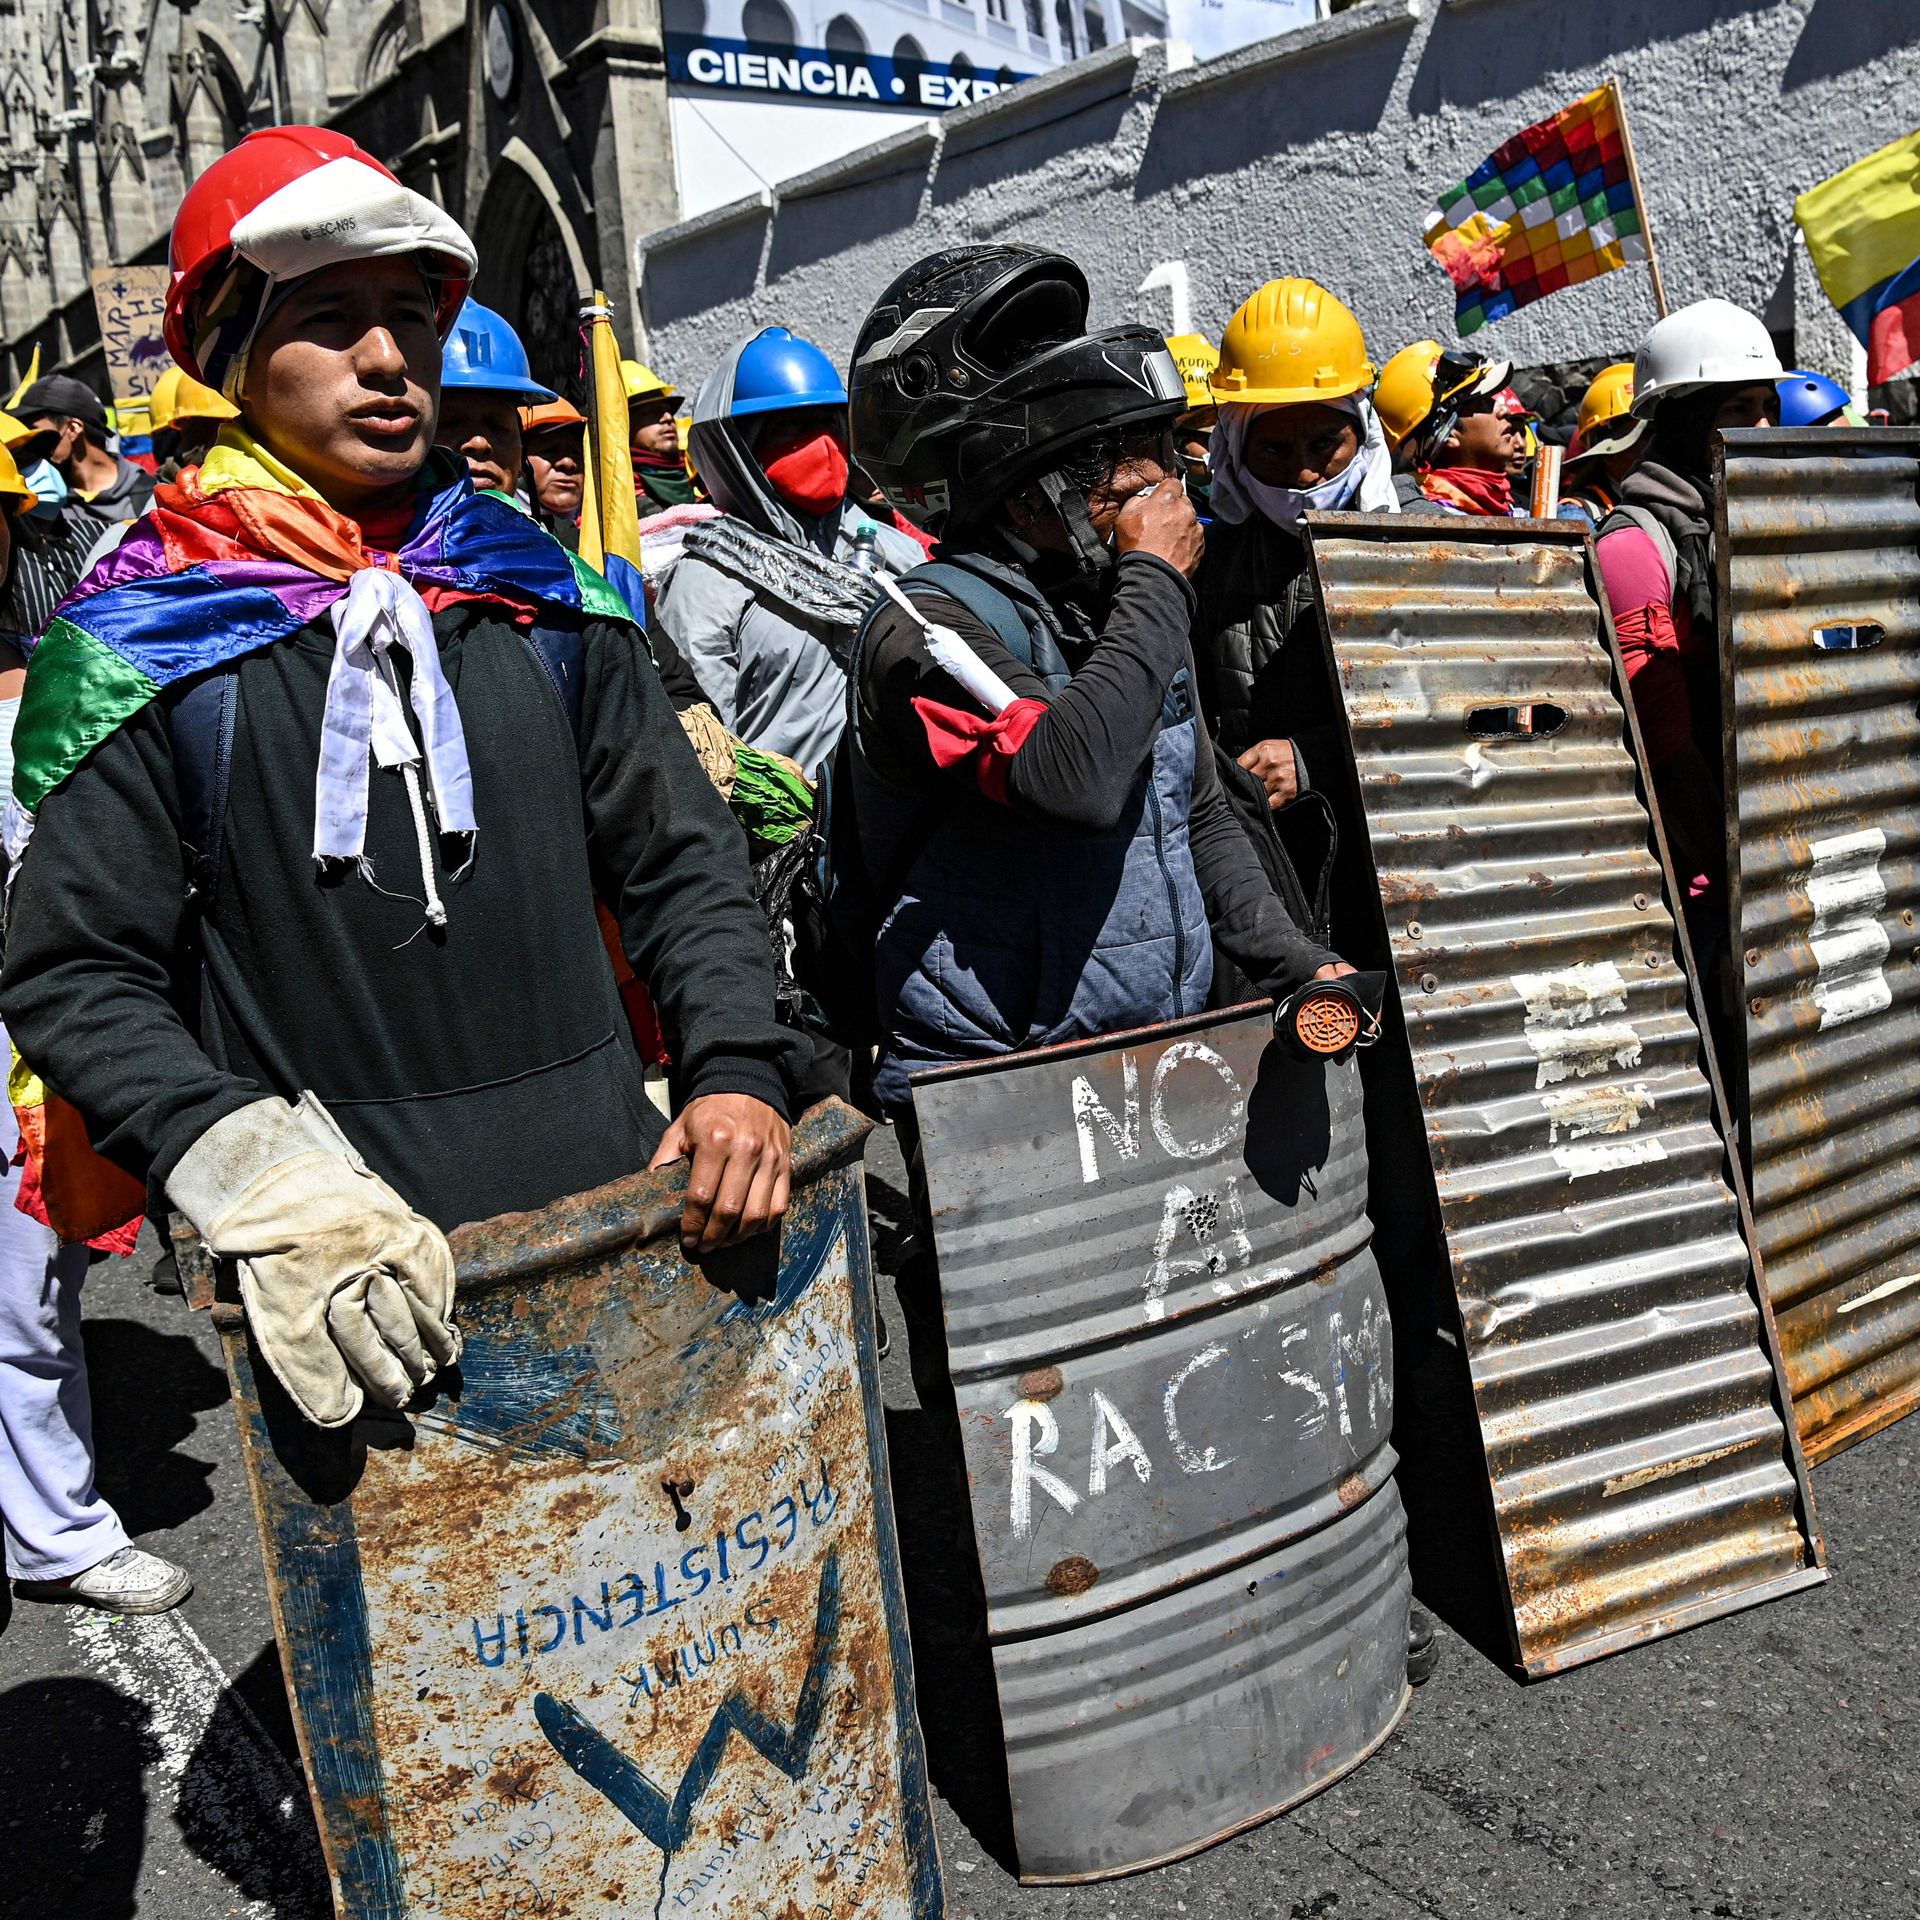 A group of protesters wearing helmets, capes and holding sheets of metal as protection walk through an anti-government protest in Ecuador